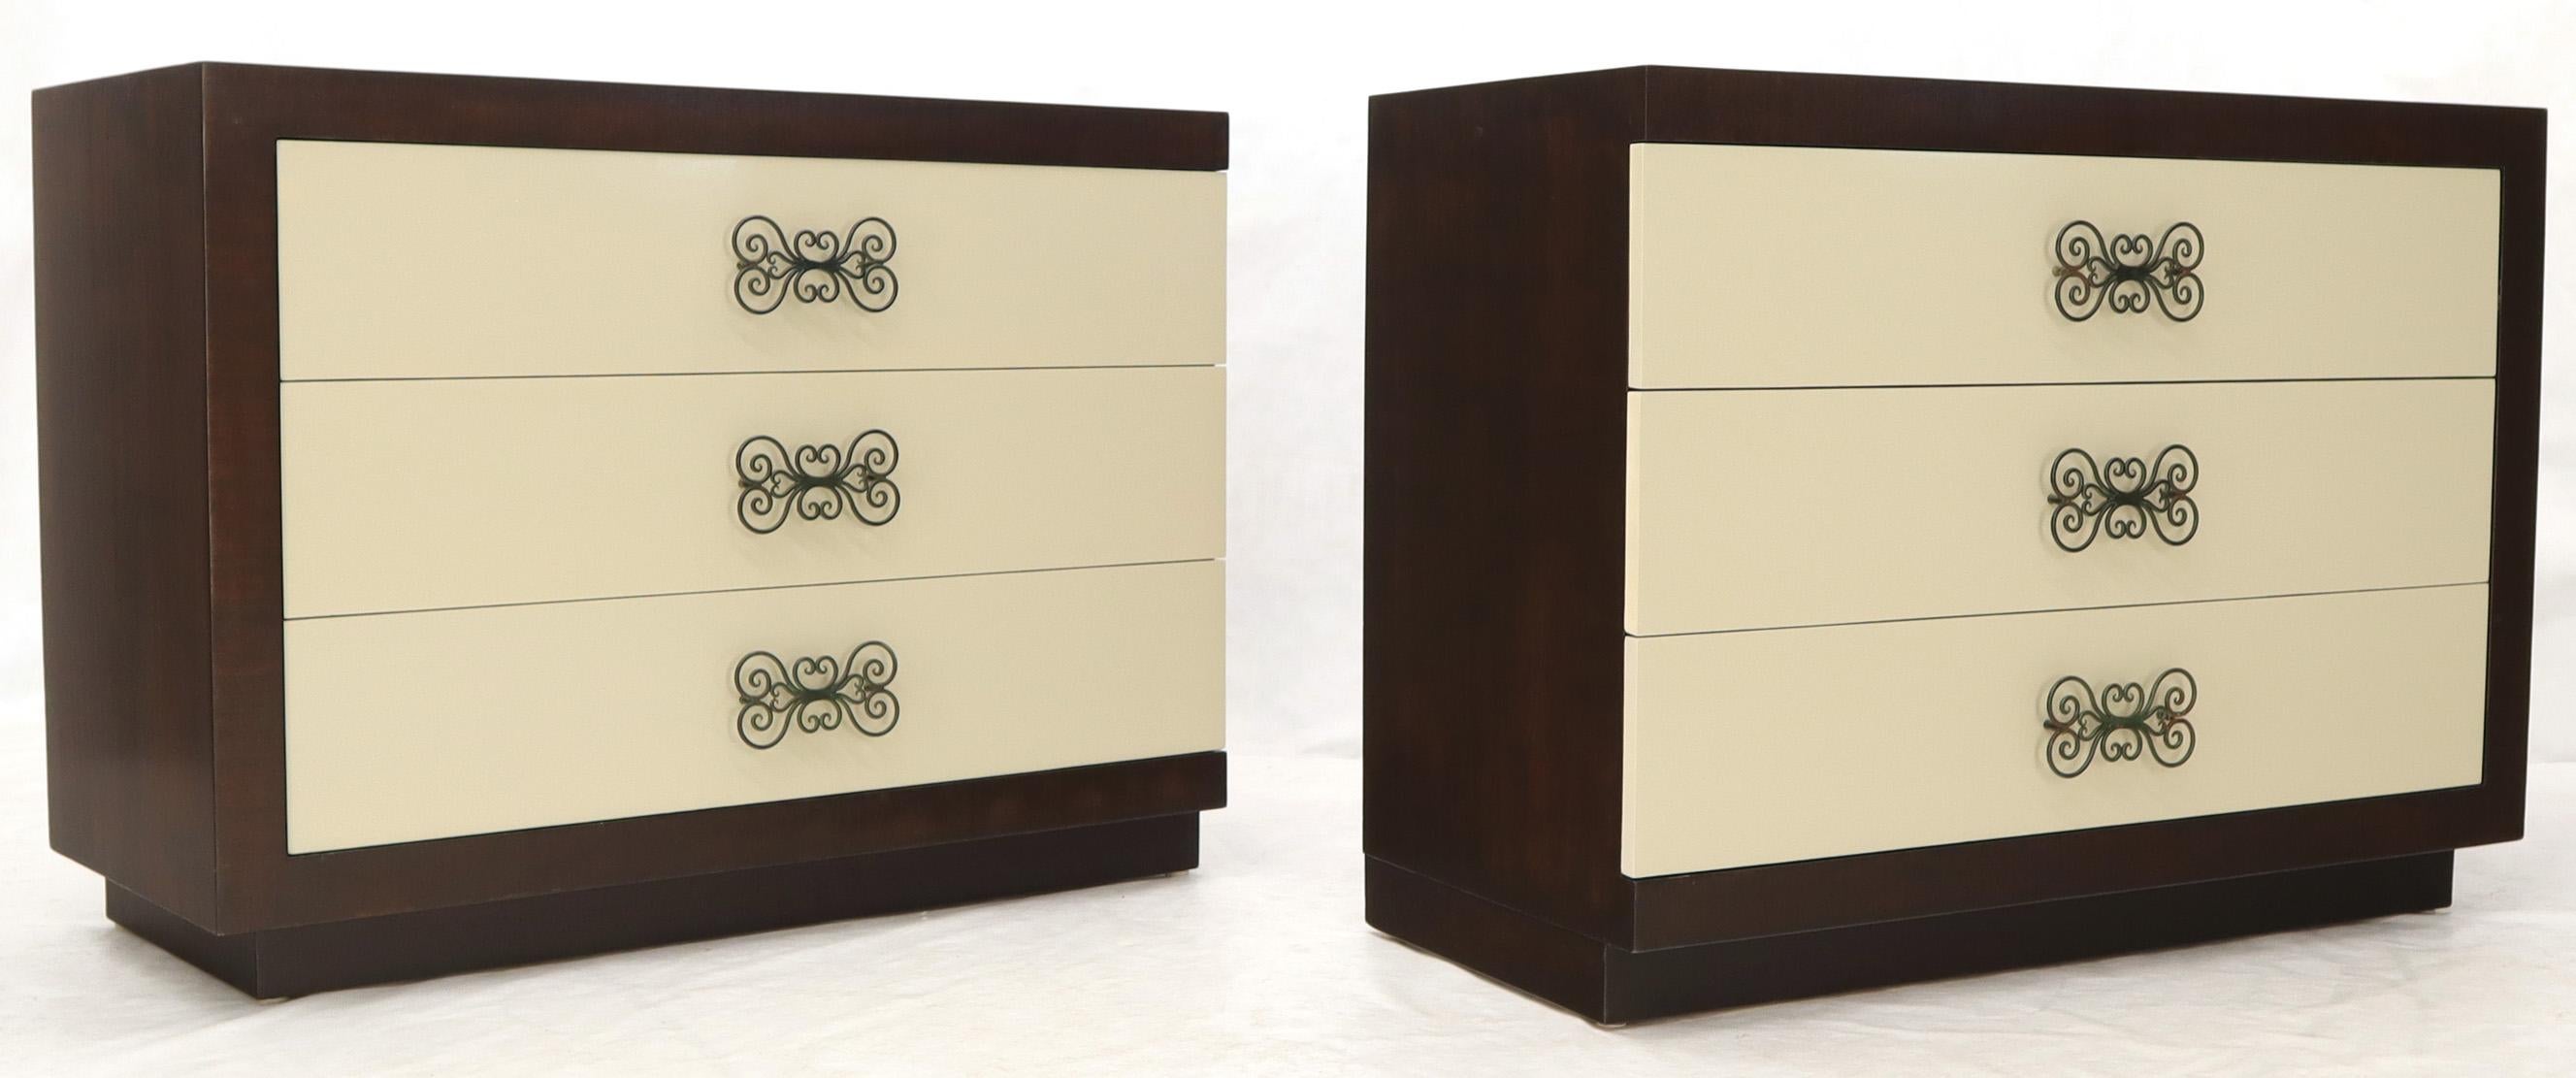 Pair of Two-Tone Mid-Century Modern Art Deco Bachelor Chests Dressers  In Excellent Condition For Sale In Rockaway, NJ